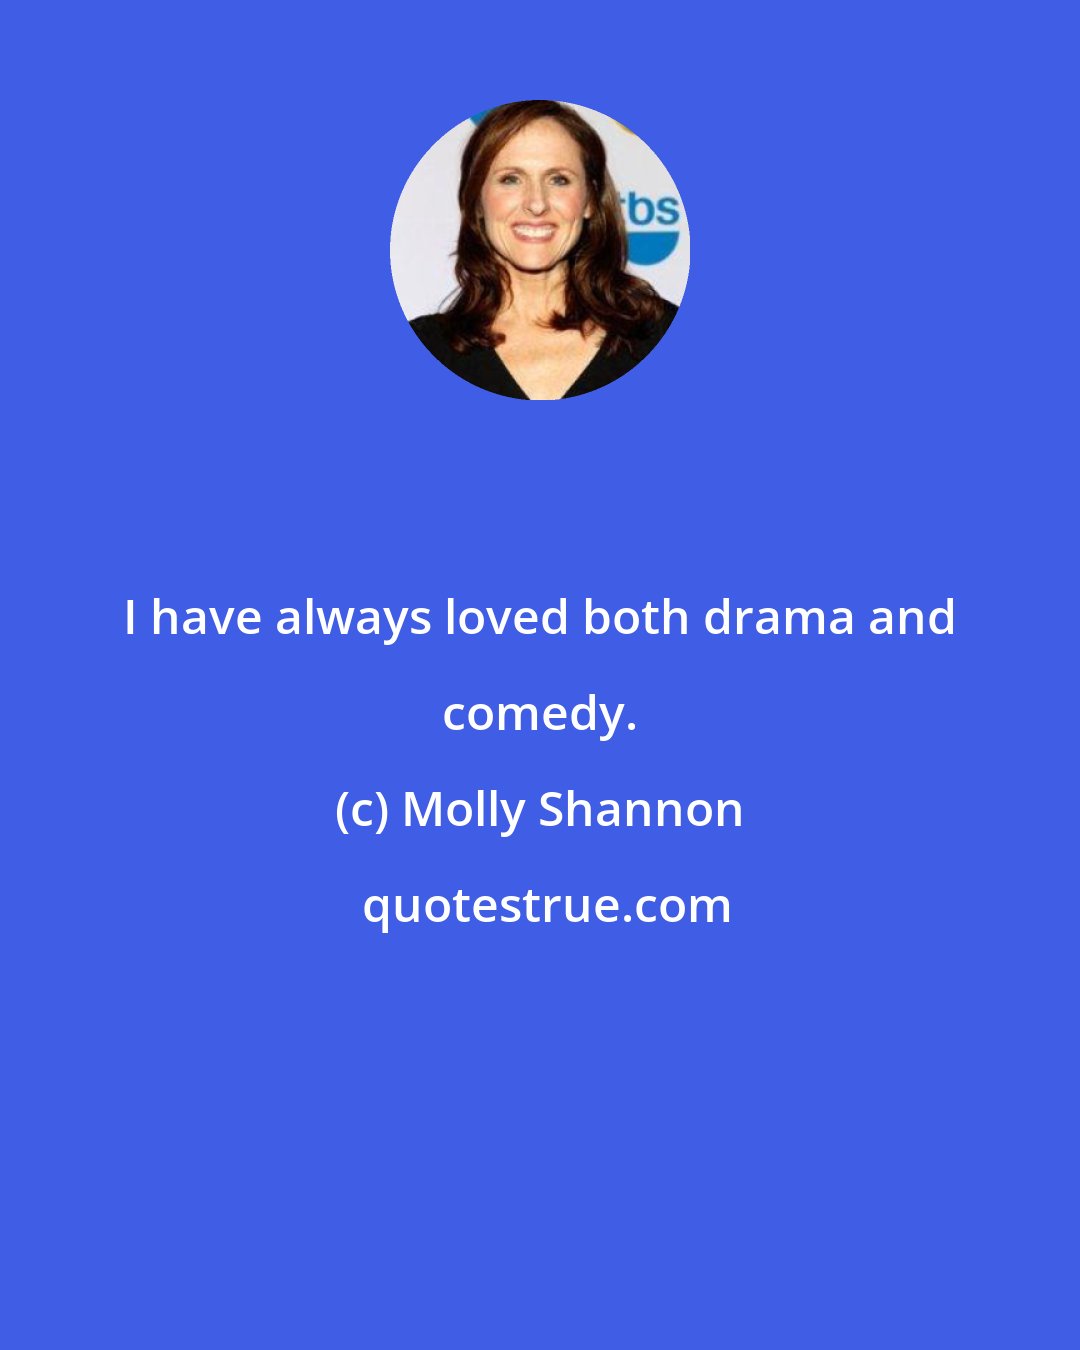 Molly Shannon: I have always loved both drama and comedy.